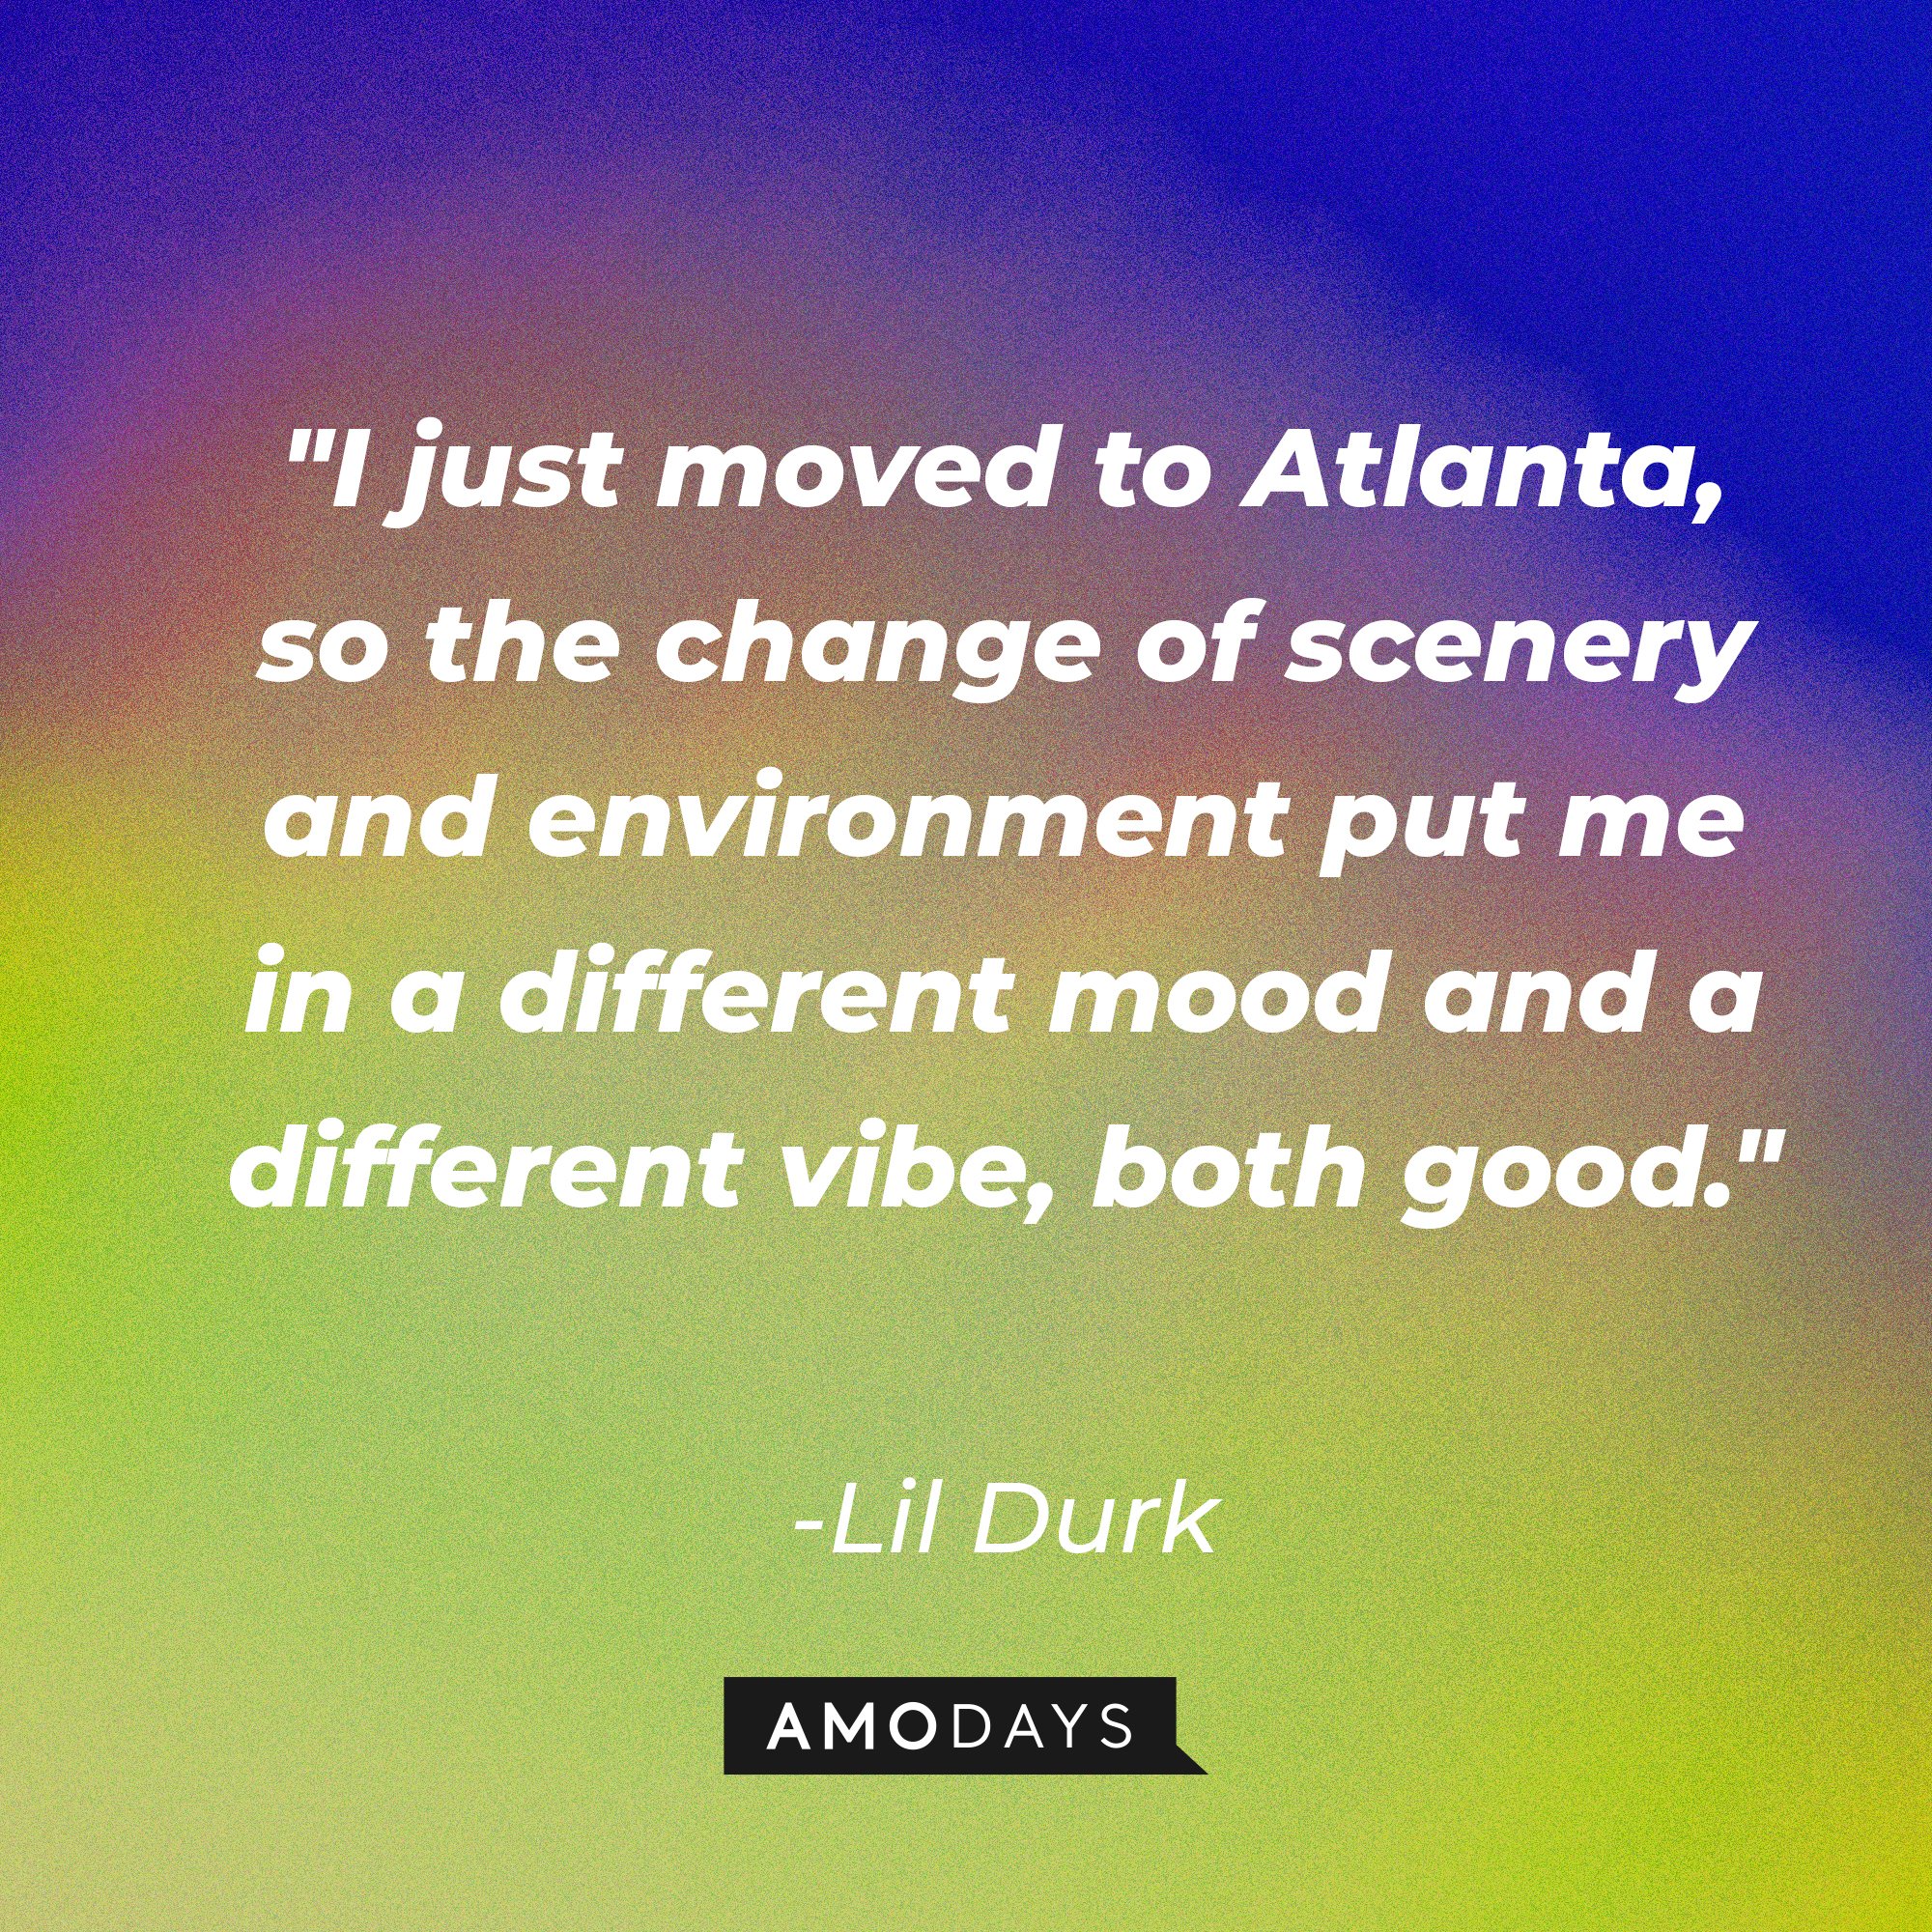 Lil Durk’s quote: "I just moved to Atlanta, so the change of scenery and environment put me in a different mood and a different vibe, both good." | Image: AmoDays 